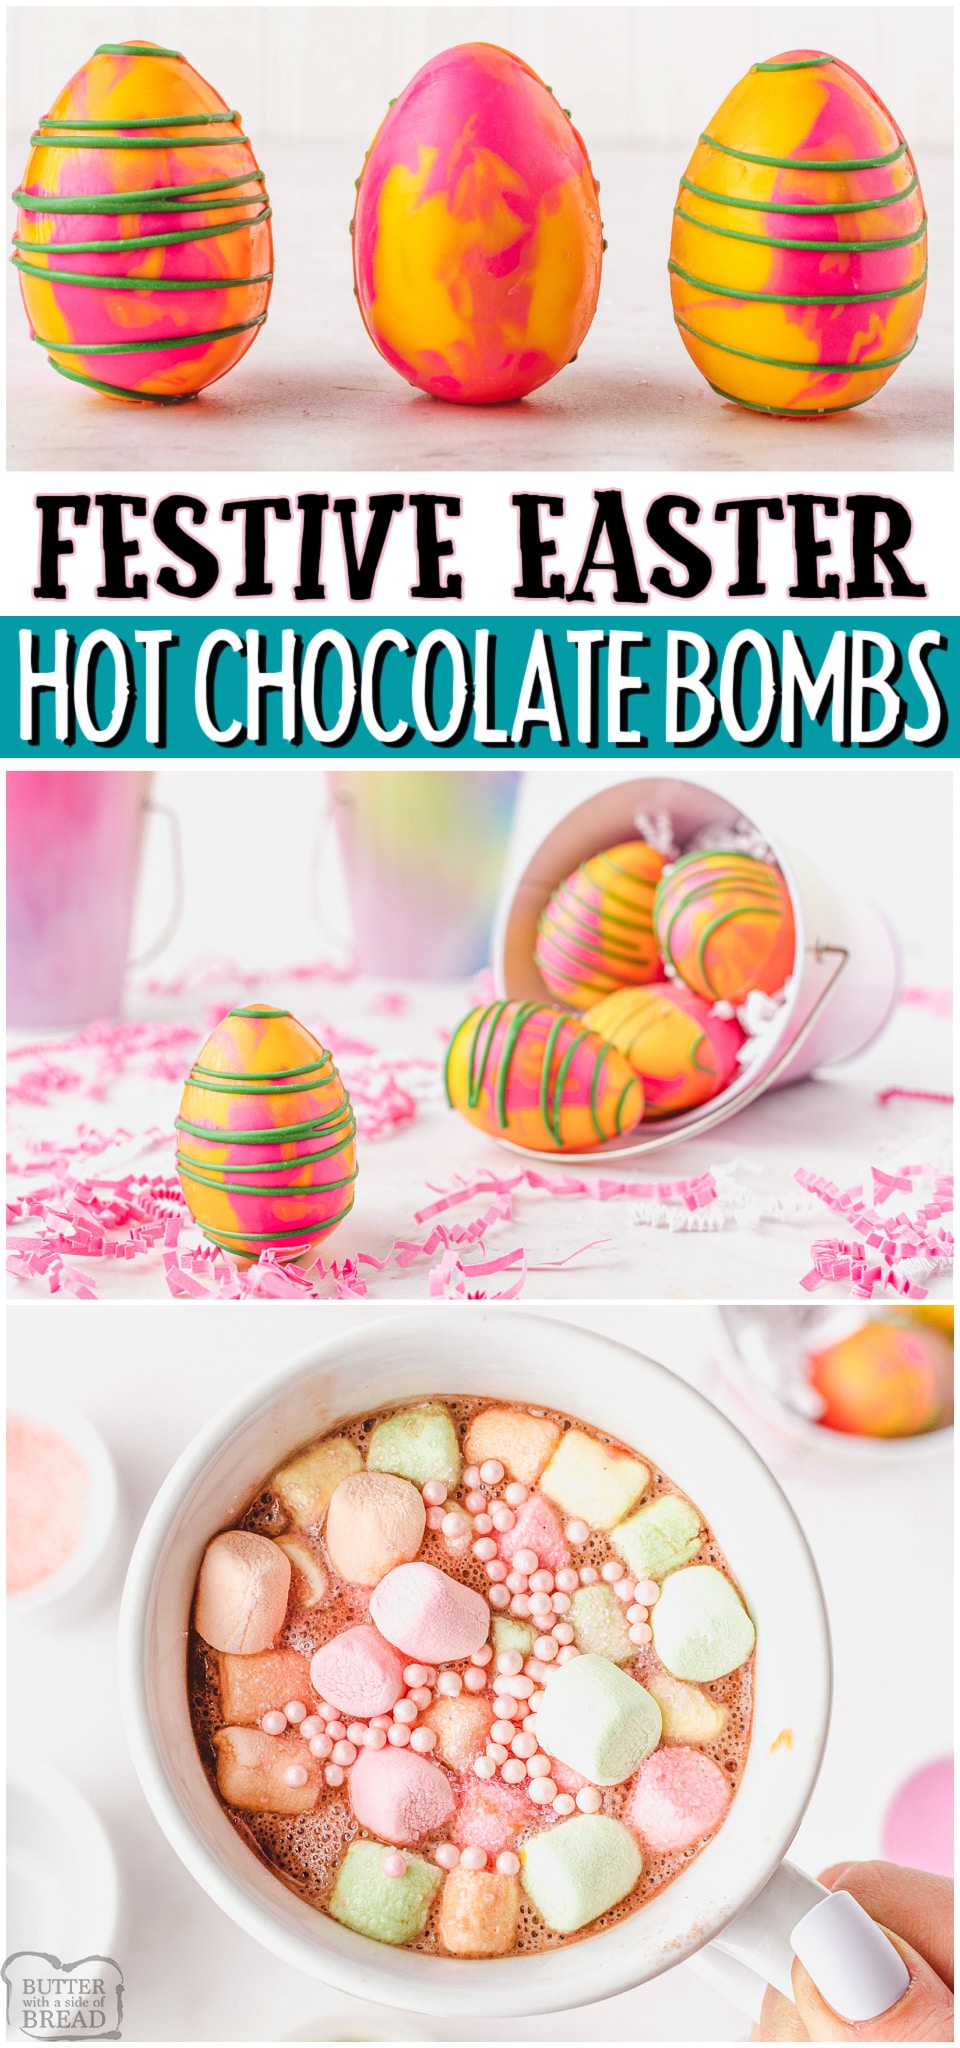 Easter hot chocolate bombs are a fun & festive way to enjoy an Easter treat! Colorful chocolate filled with white hot chocolate & sprinkles - all with an Easter twist! #Easter #chocolate #hotchocolate #hotchocolatebombs #festive #easyrecipe from BUTTER WITH A SIDE OF BREAD